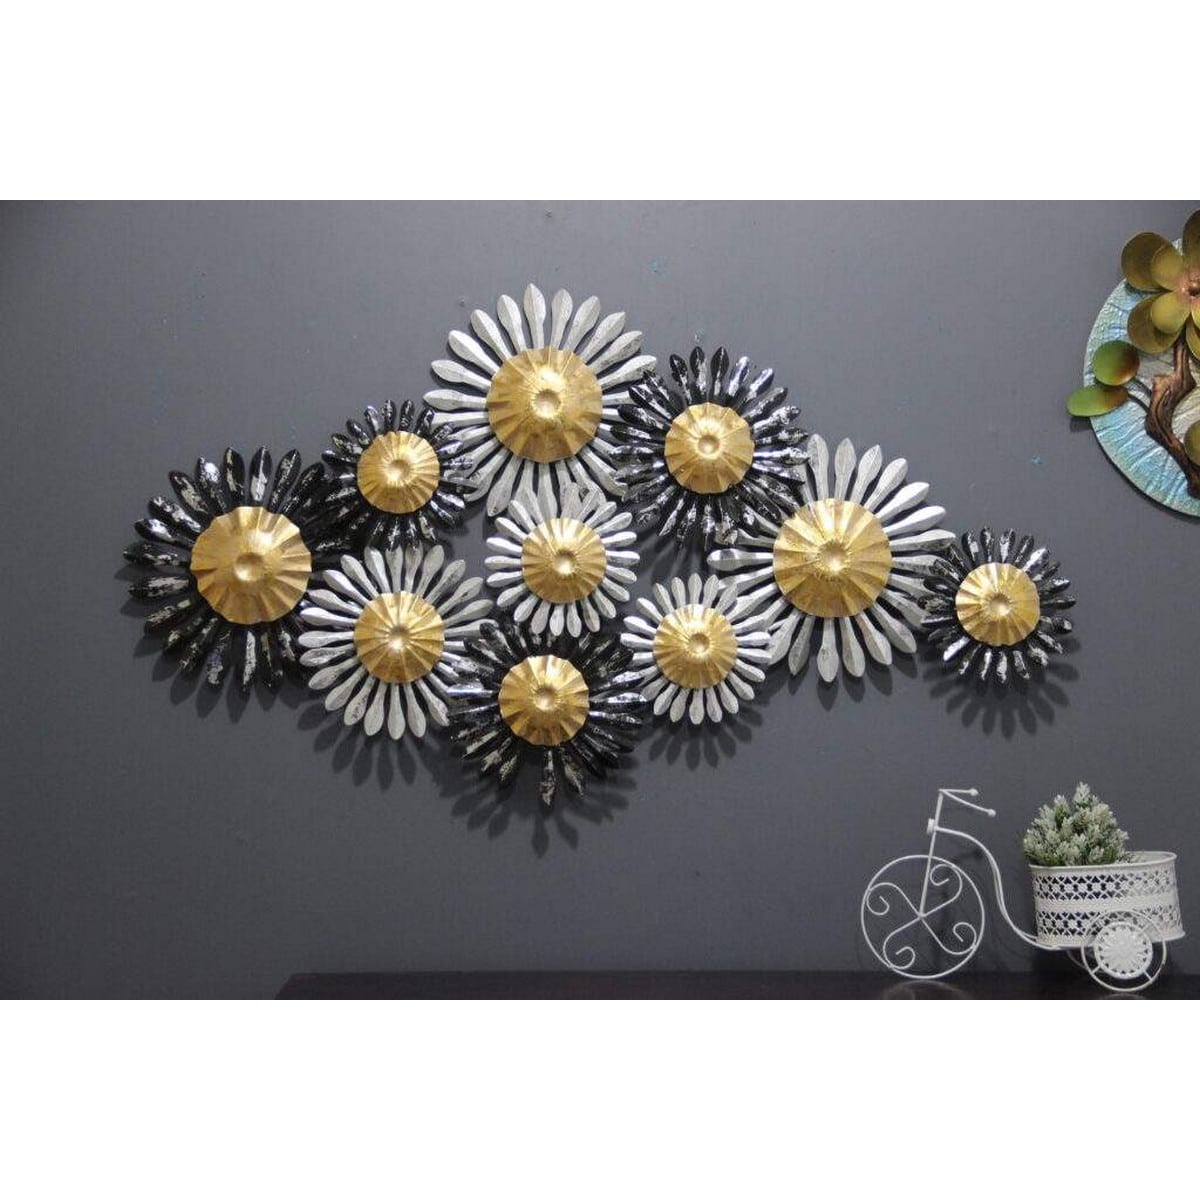 Blossoming Elegance Beautiful Metal Flower Wall Art for Home Decor